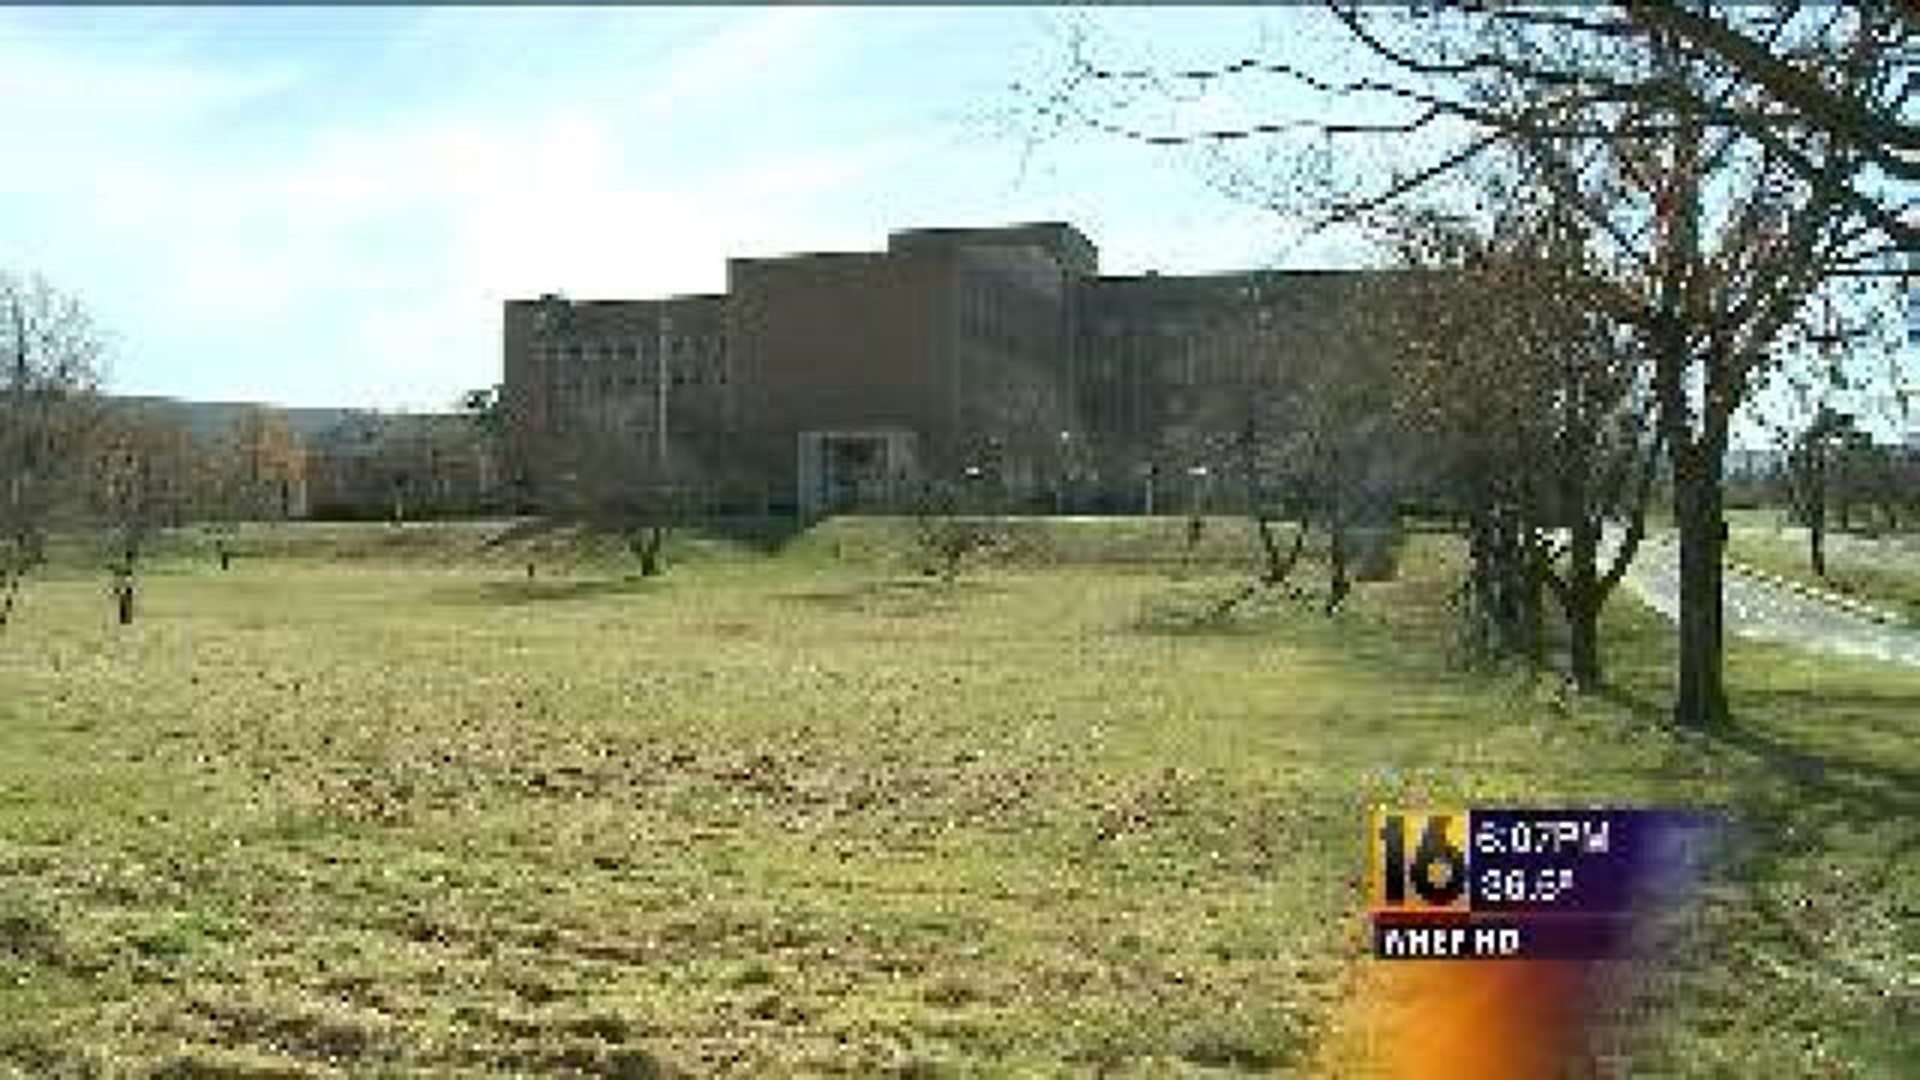 Personal, Private Info Found on Items from Auction at Shuttered Hospital